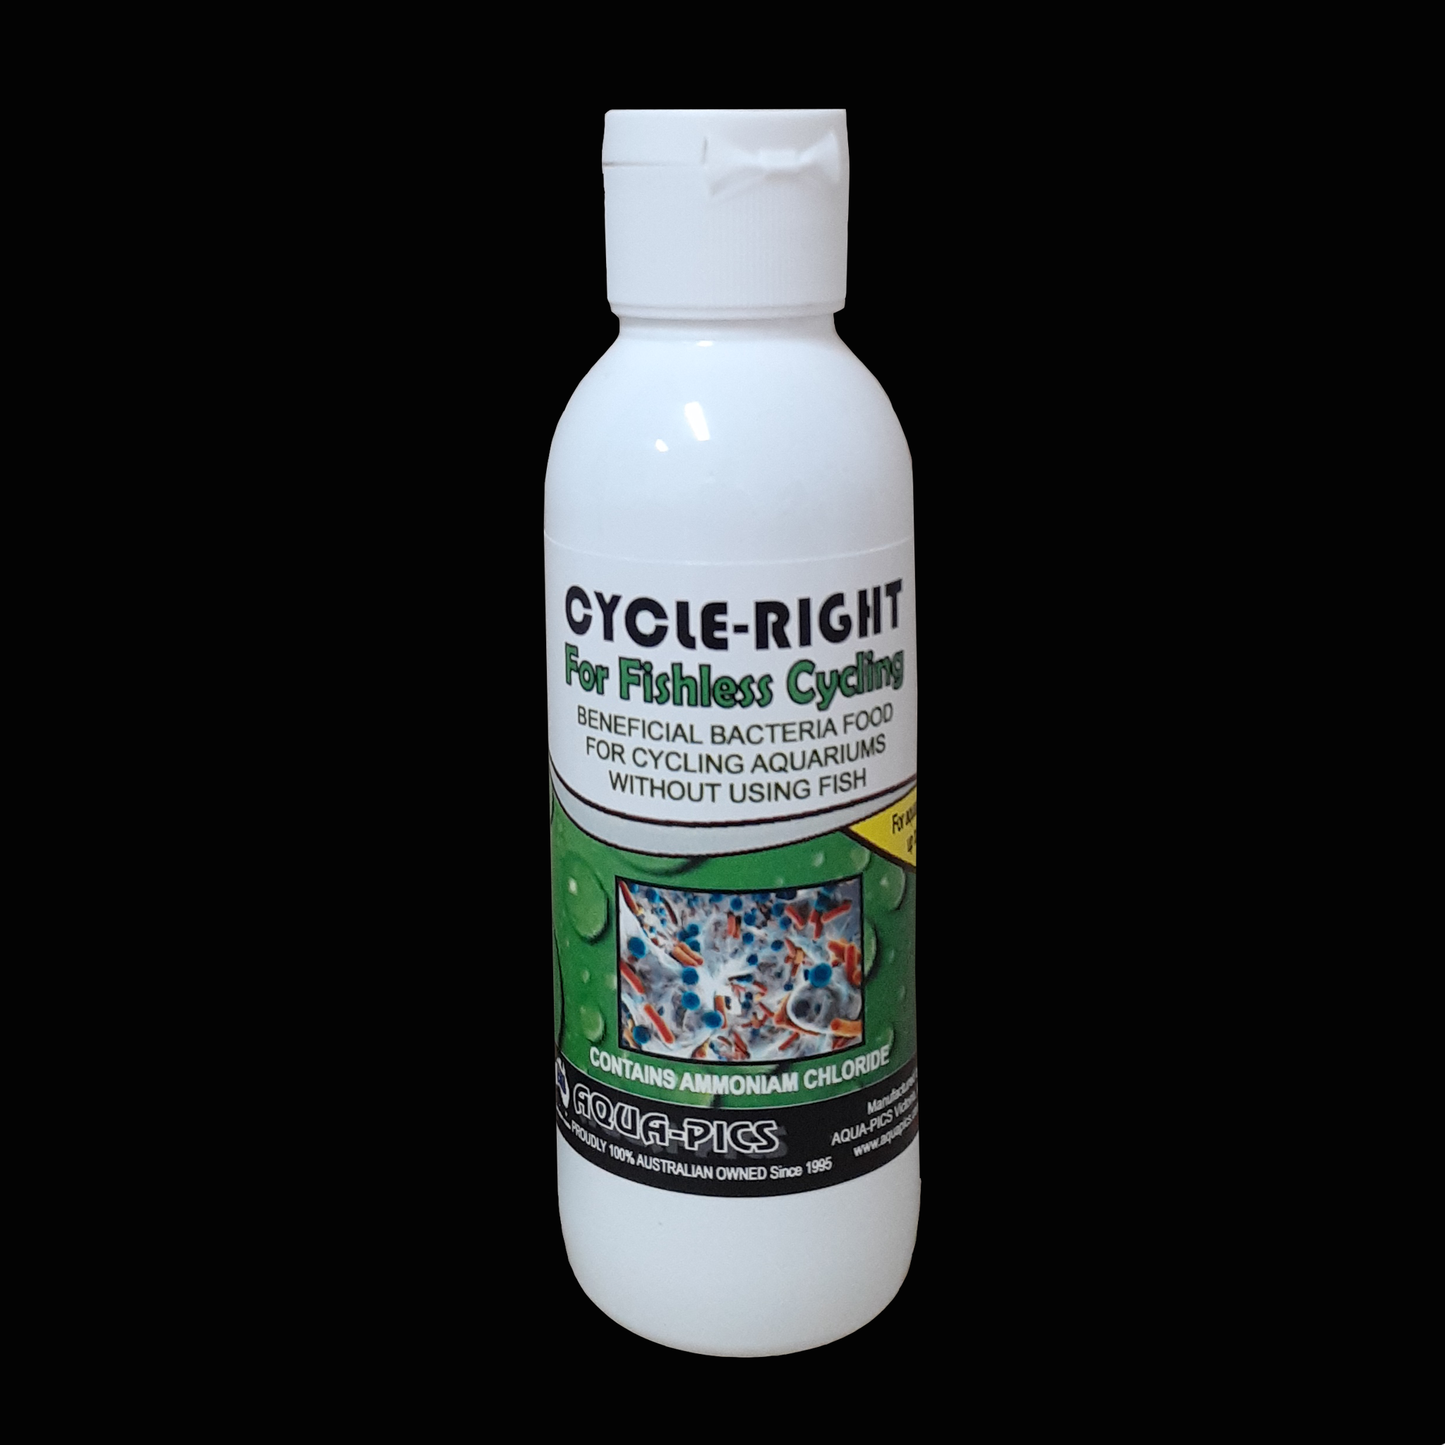 Cycle-Right Bacteria Food (for fishless cycling) 125ml